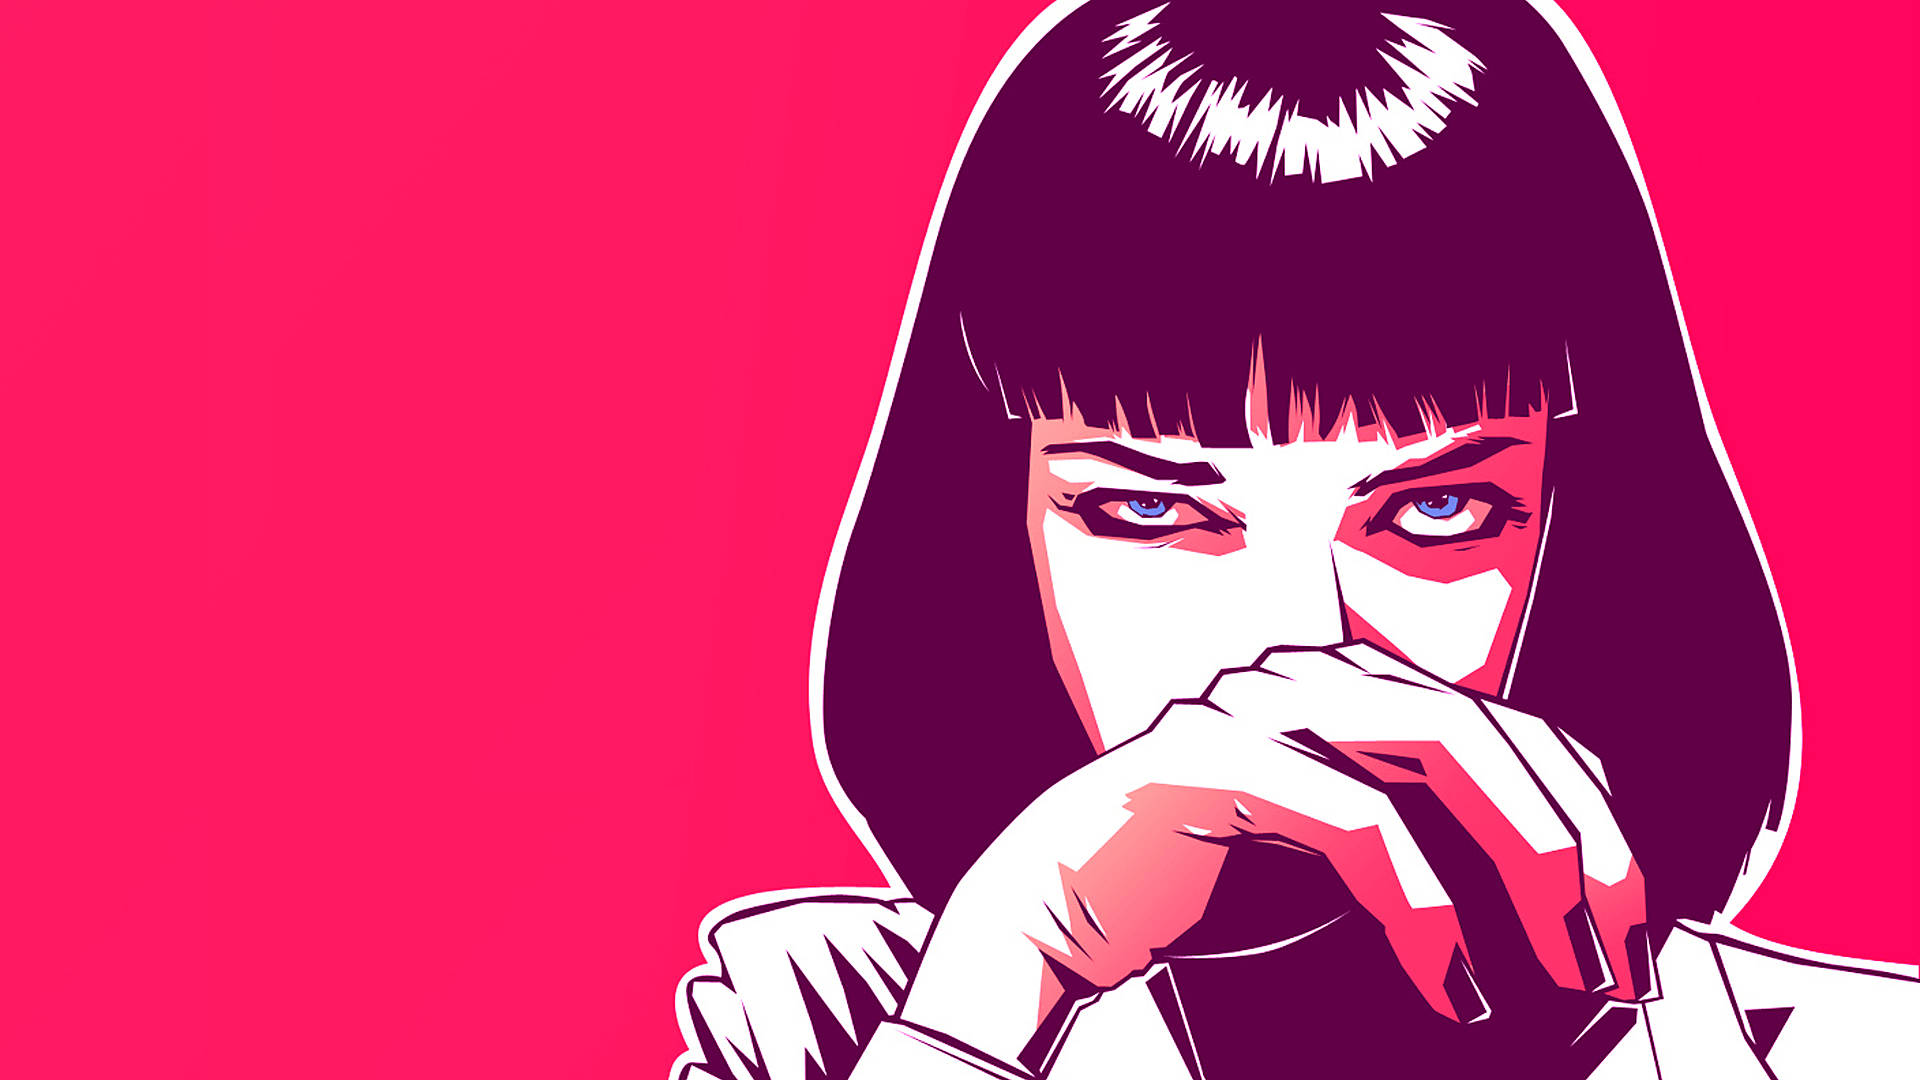 Pulp Fiction Mia Wallace Aesthetic Artwork Picture